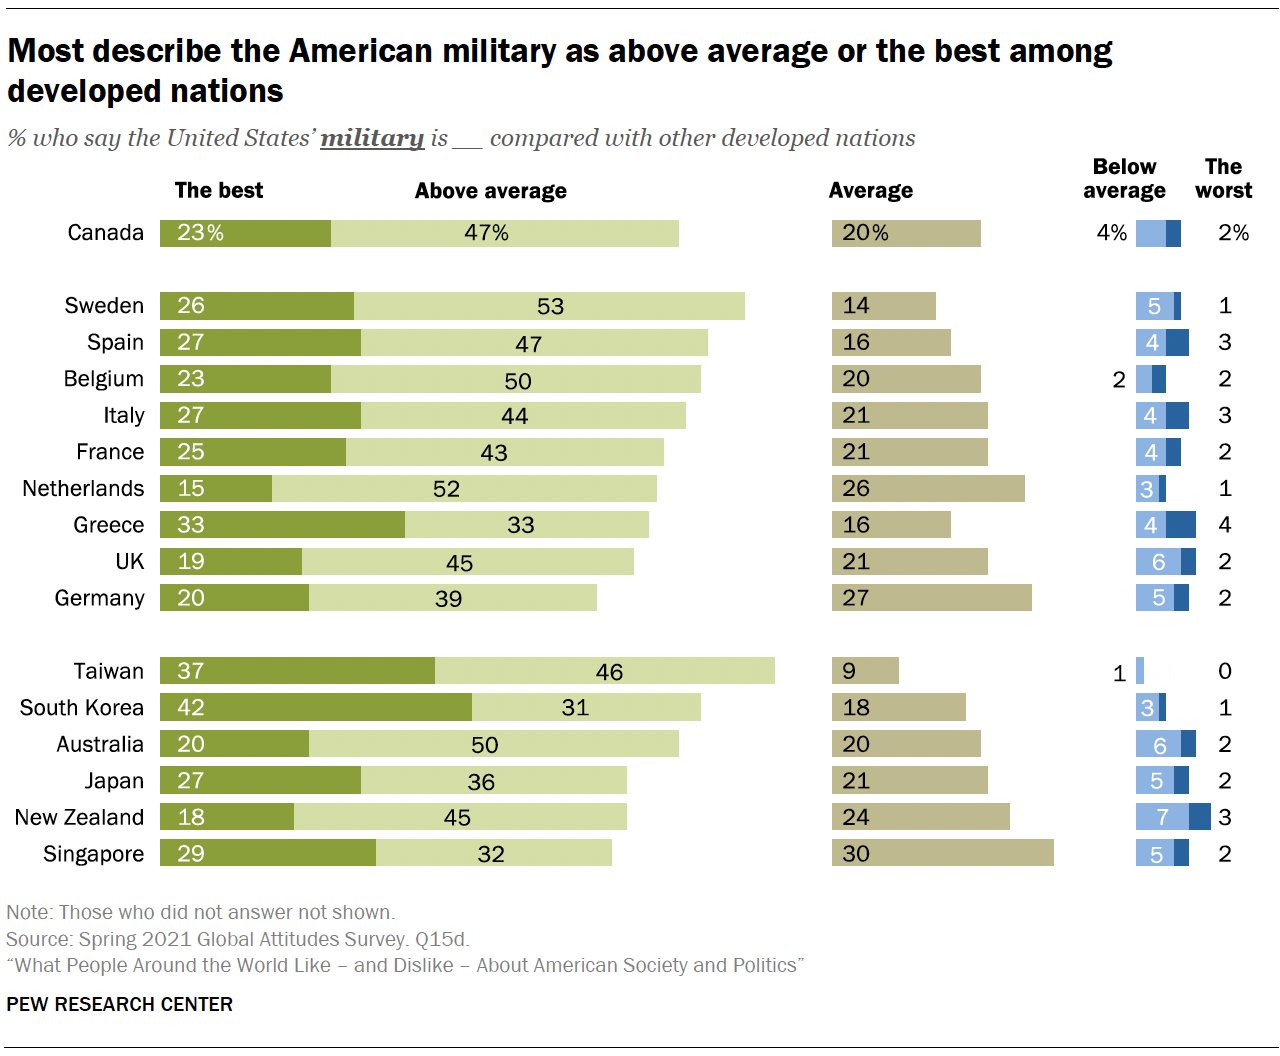 Most describe the American military as above average or the best among developed nations